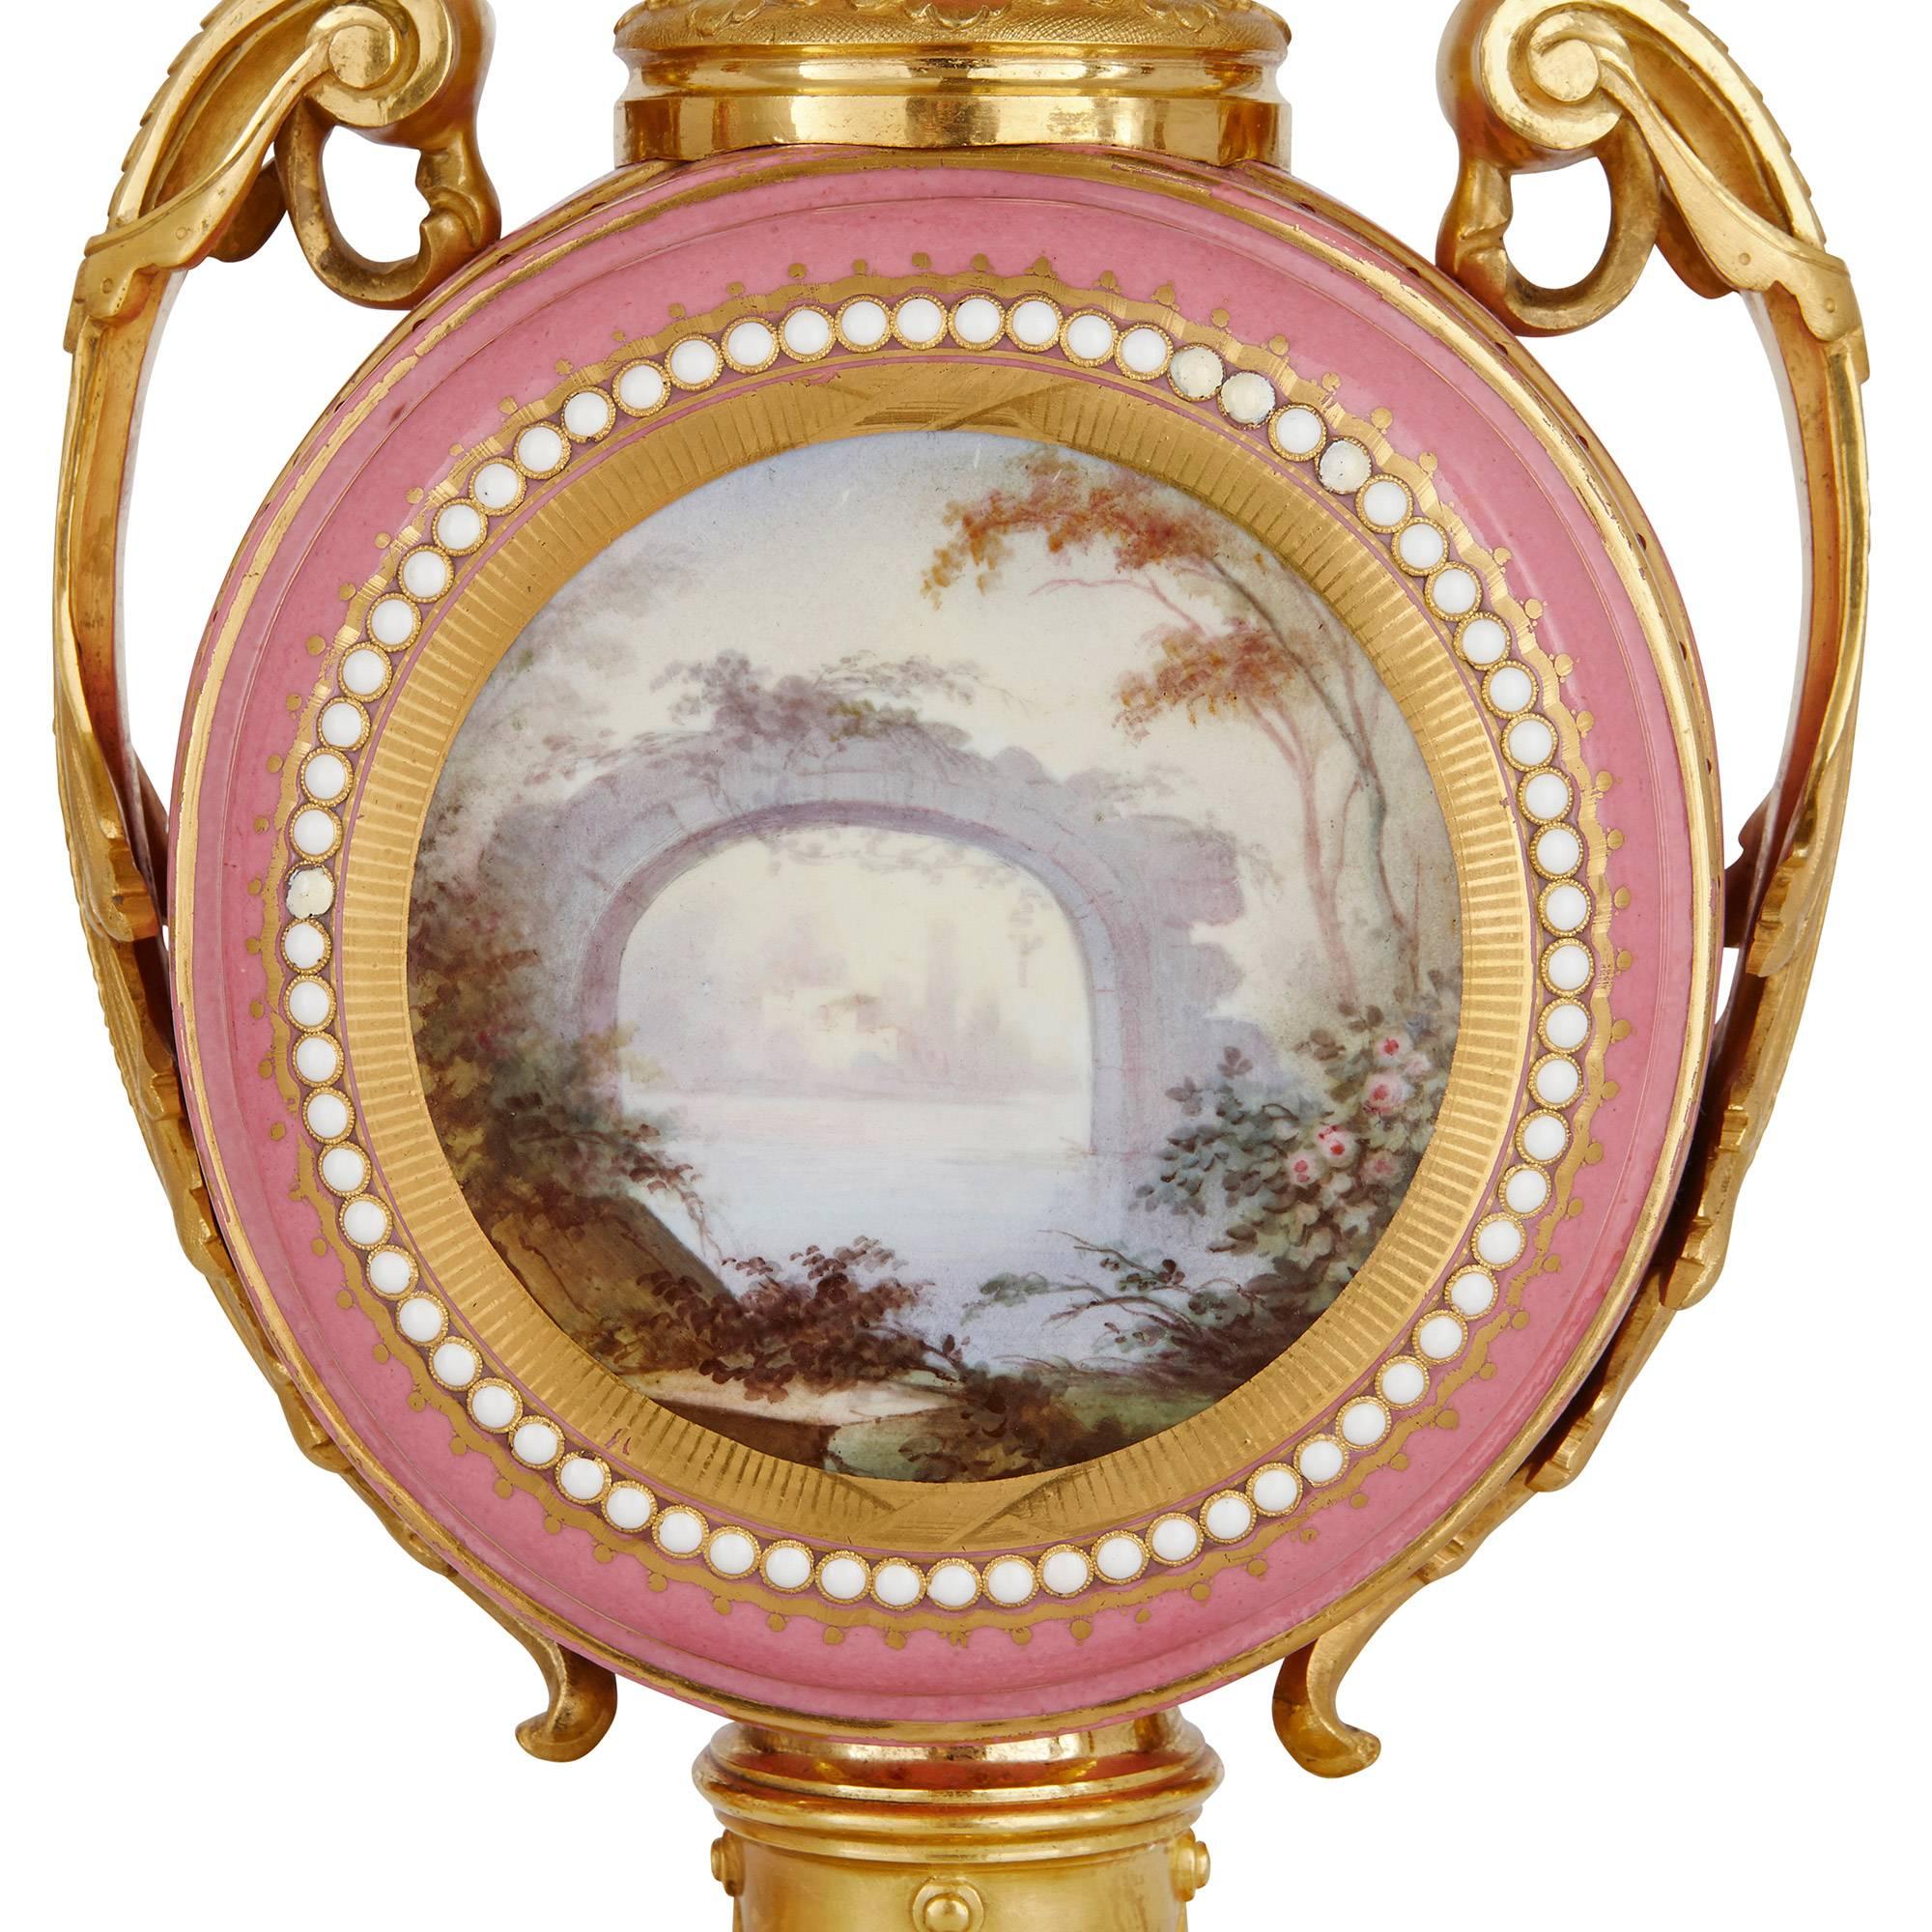 Sèvres Style Gold Ormolu and Pink Porcelain Antique French Three-Piece Clock Set For Sale 3